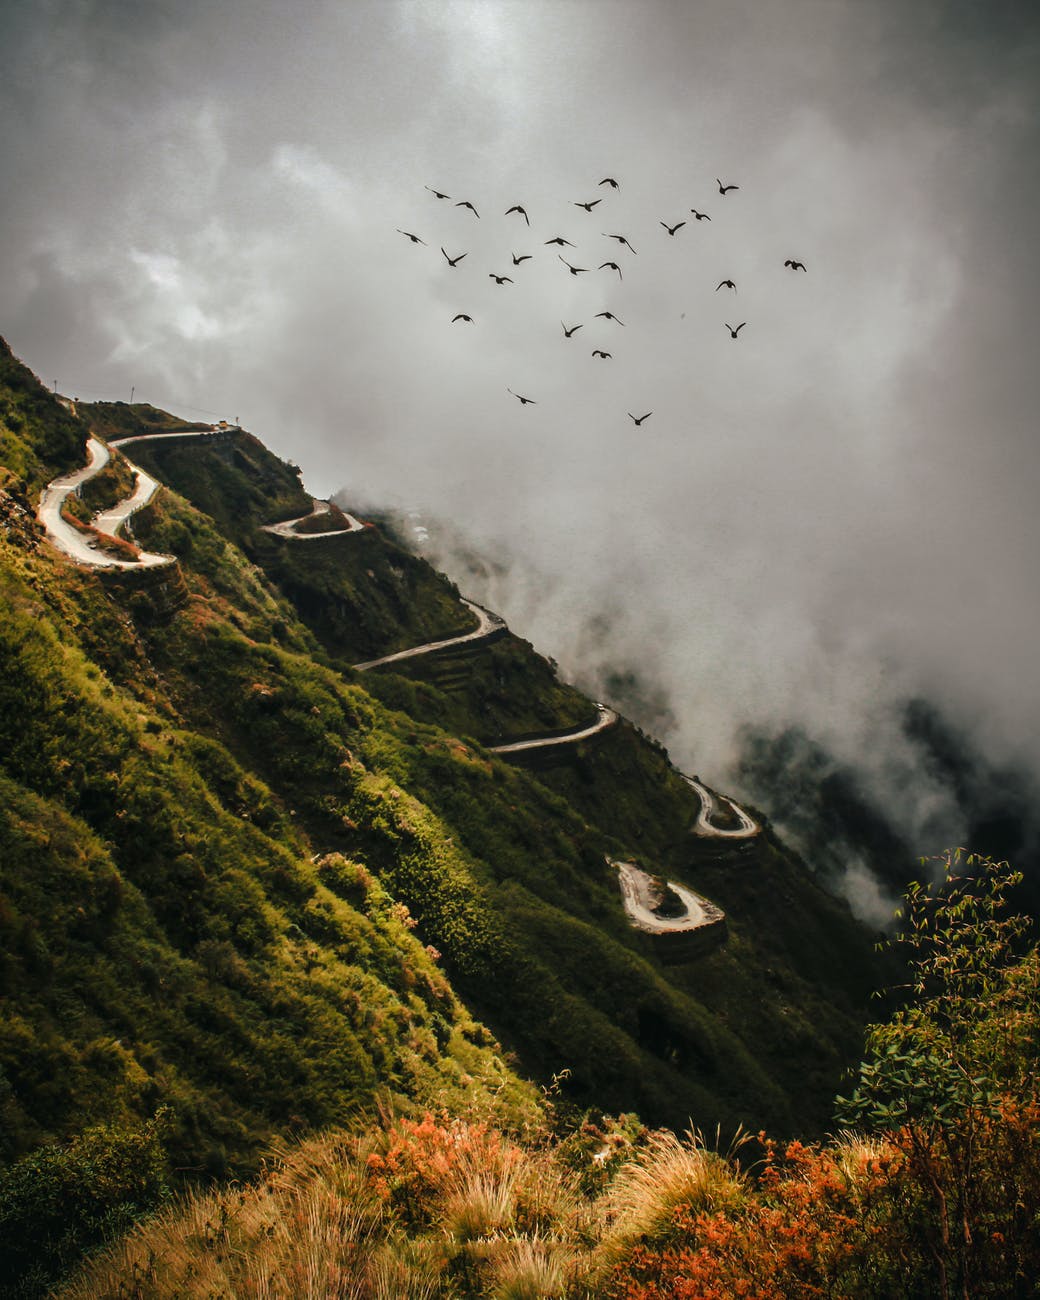 A Flock Of Birds In Flight The Mountain With A Winding Road